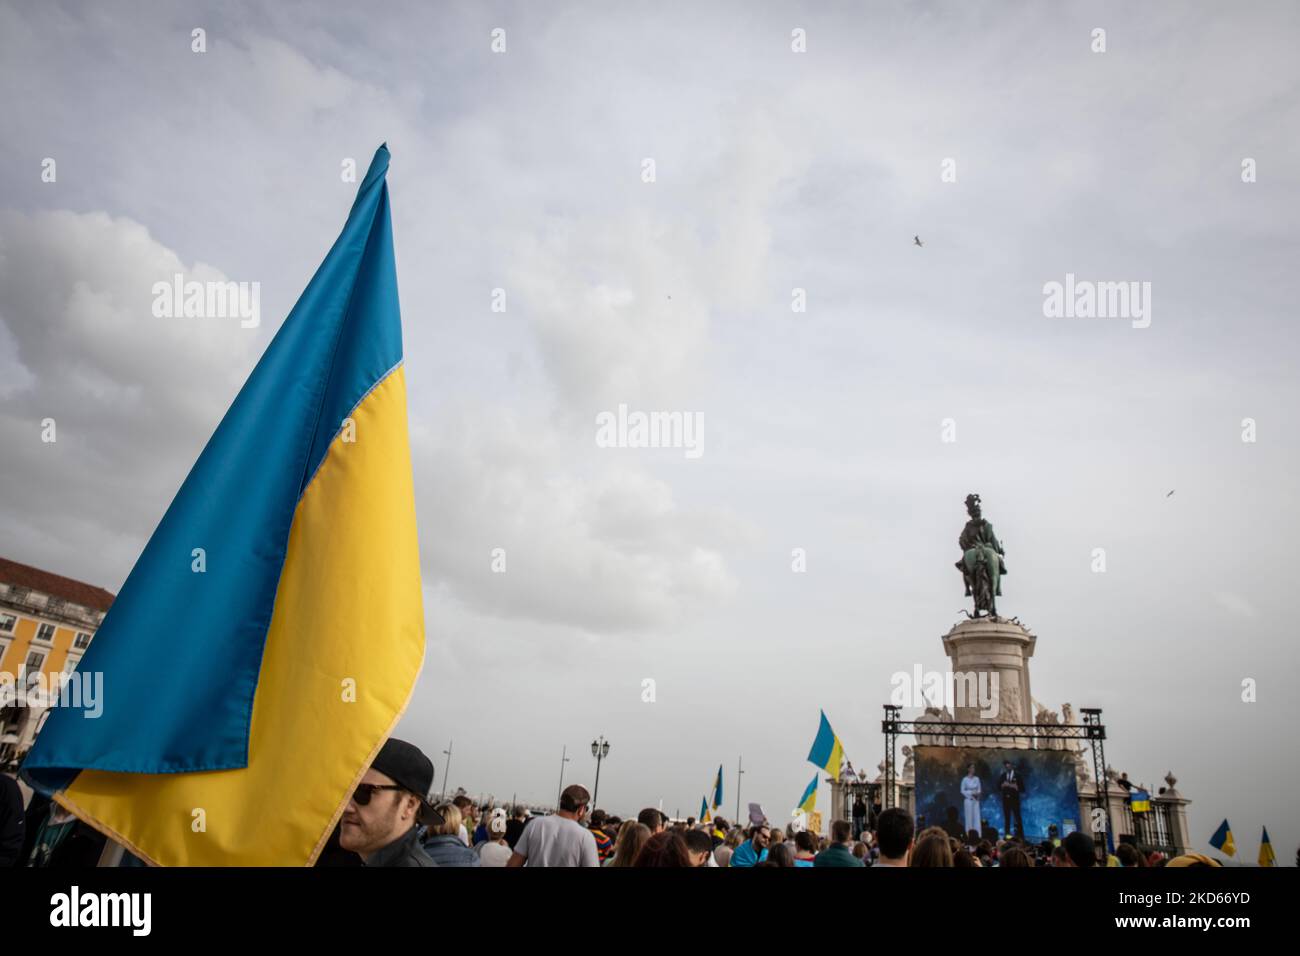 An Ukrainian flag (Ukraine National Flag) is seen in Praca do Comercio, in Lisbon, Portugal during a demonstration to show solidarity with the people of that country following the Russian invasion on March 27, 2022. - More than 3.8 million people have fled Ukraine since Russia's invasion a month ago, UN figures showed on March 27, but the flow of refugees has slowed down markedly. The UN refugee agency, UNHCR, said 3,821,049 Ukrainians had fled the country -- an increase of 48,450 from the figures of March 26. (Photo by Manuel Romano/NurPhoto) Stock Photo